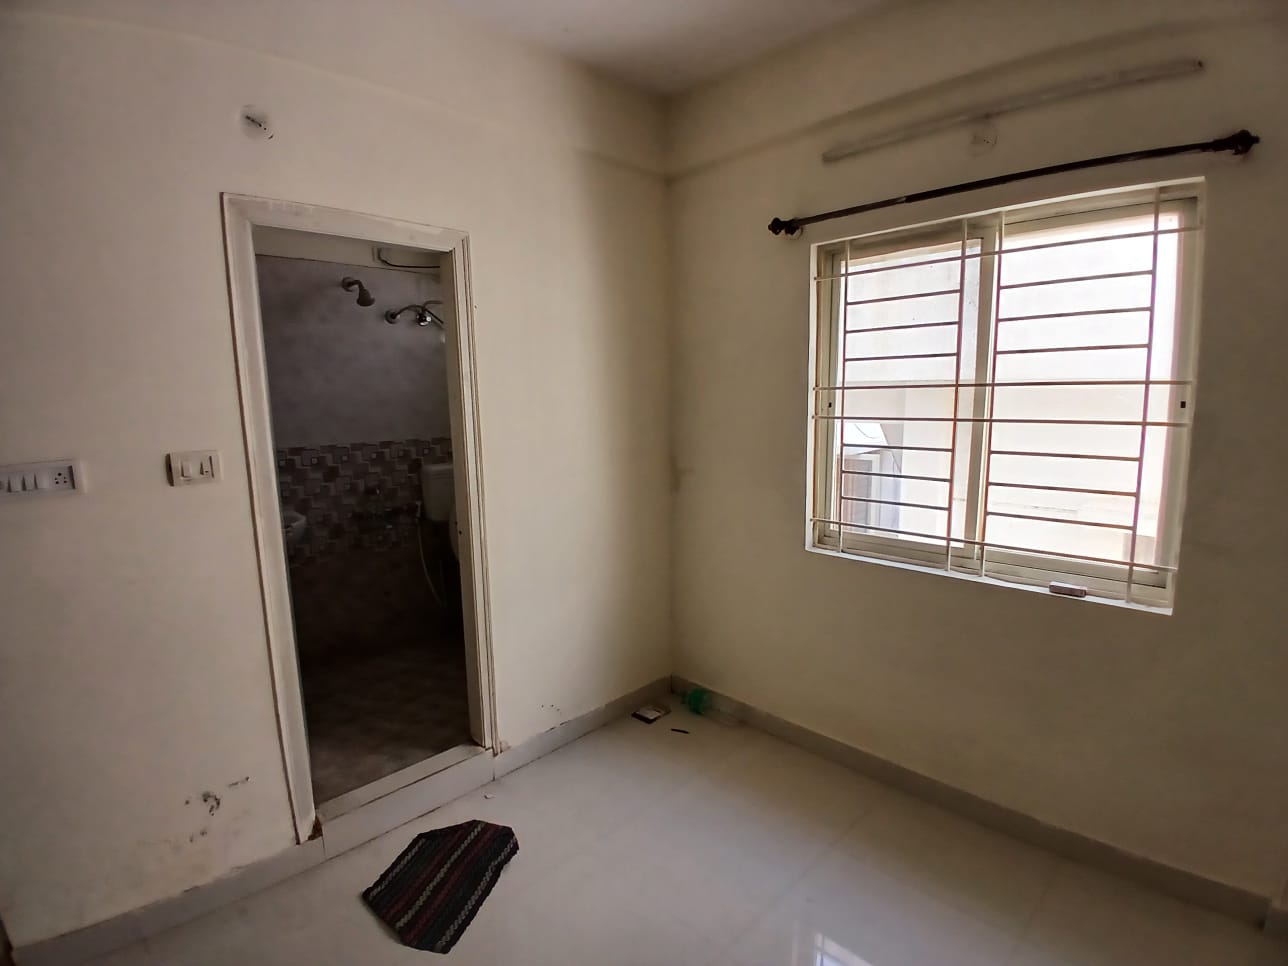 1 BHK Residential Apartment for Lease Only at JAML2 - 3472 in Kadubeesanahalli